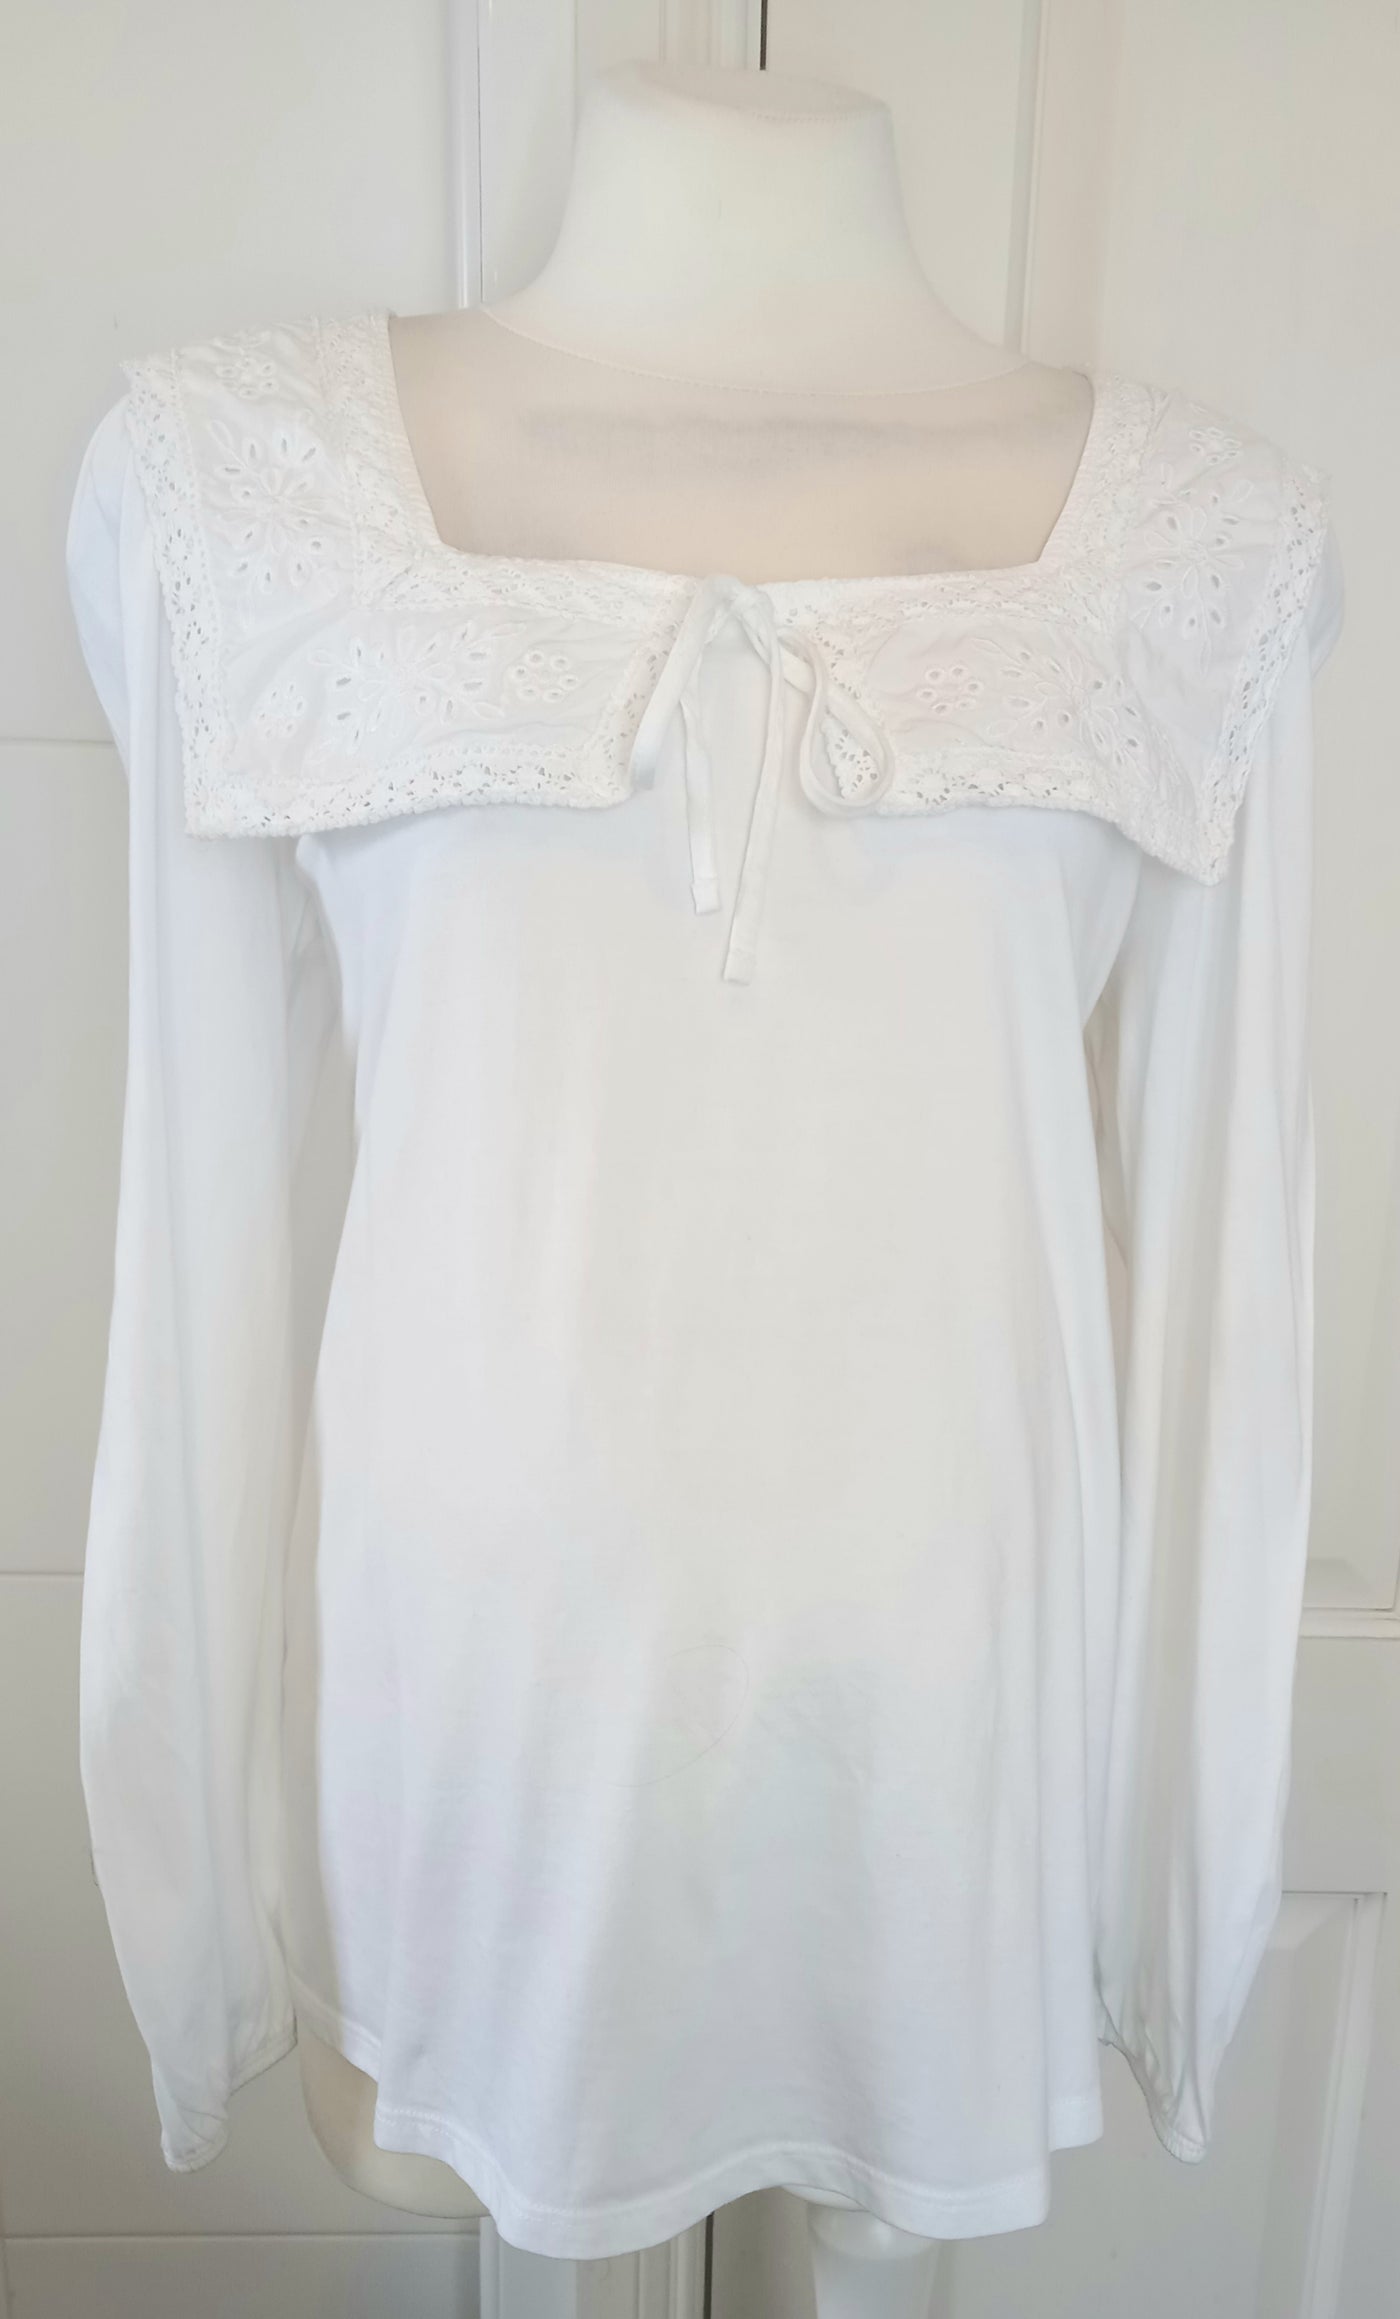 Next Maternity White Large Collar Top - Size 14